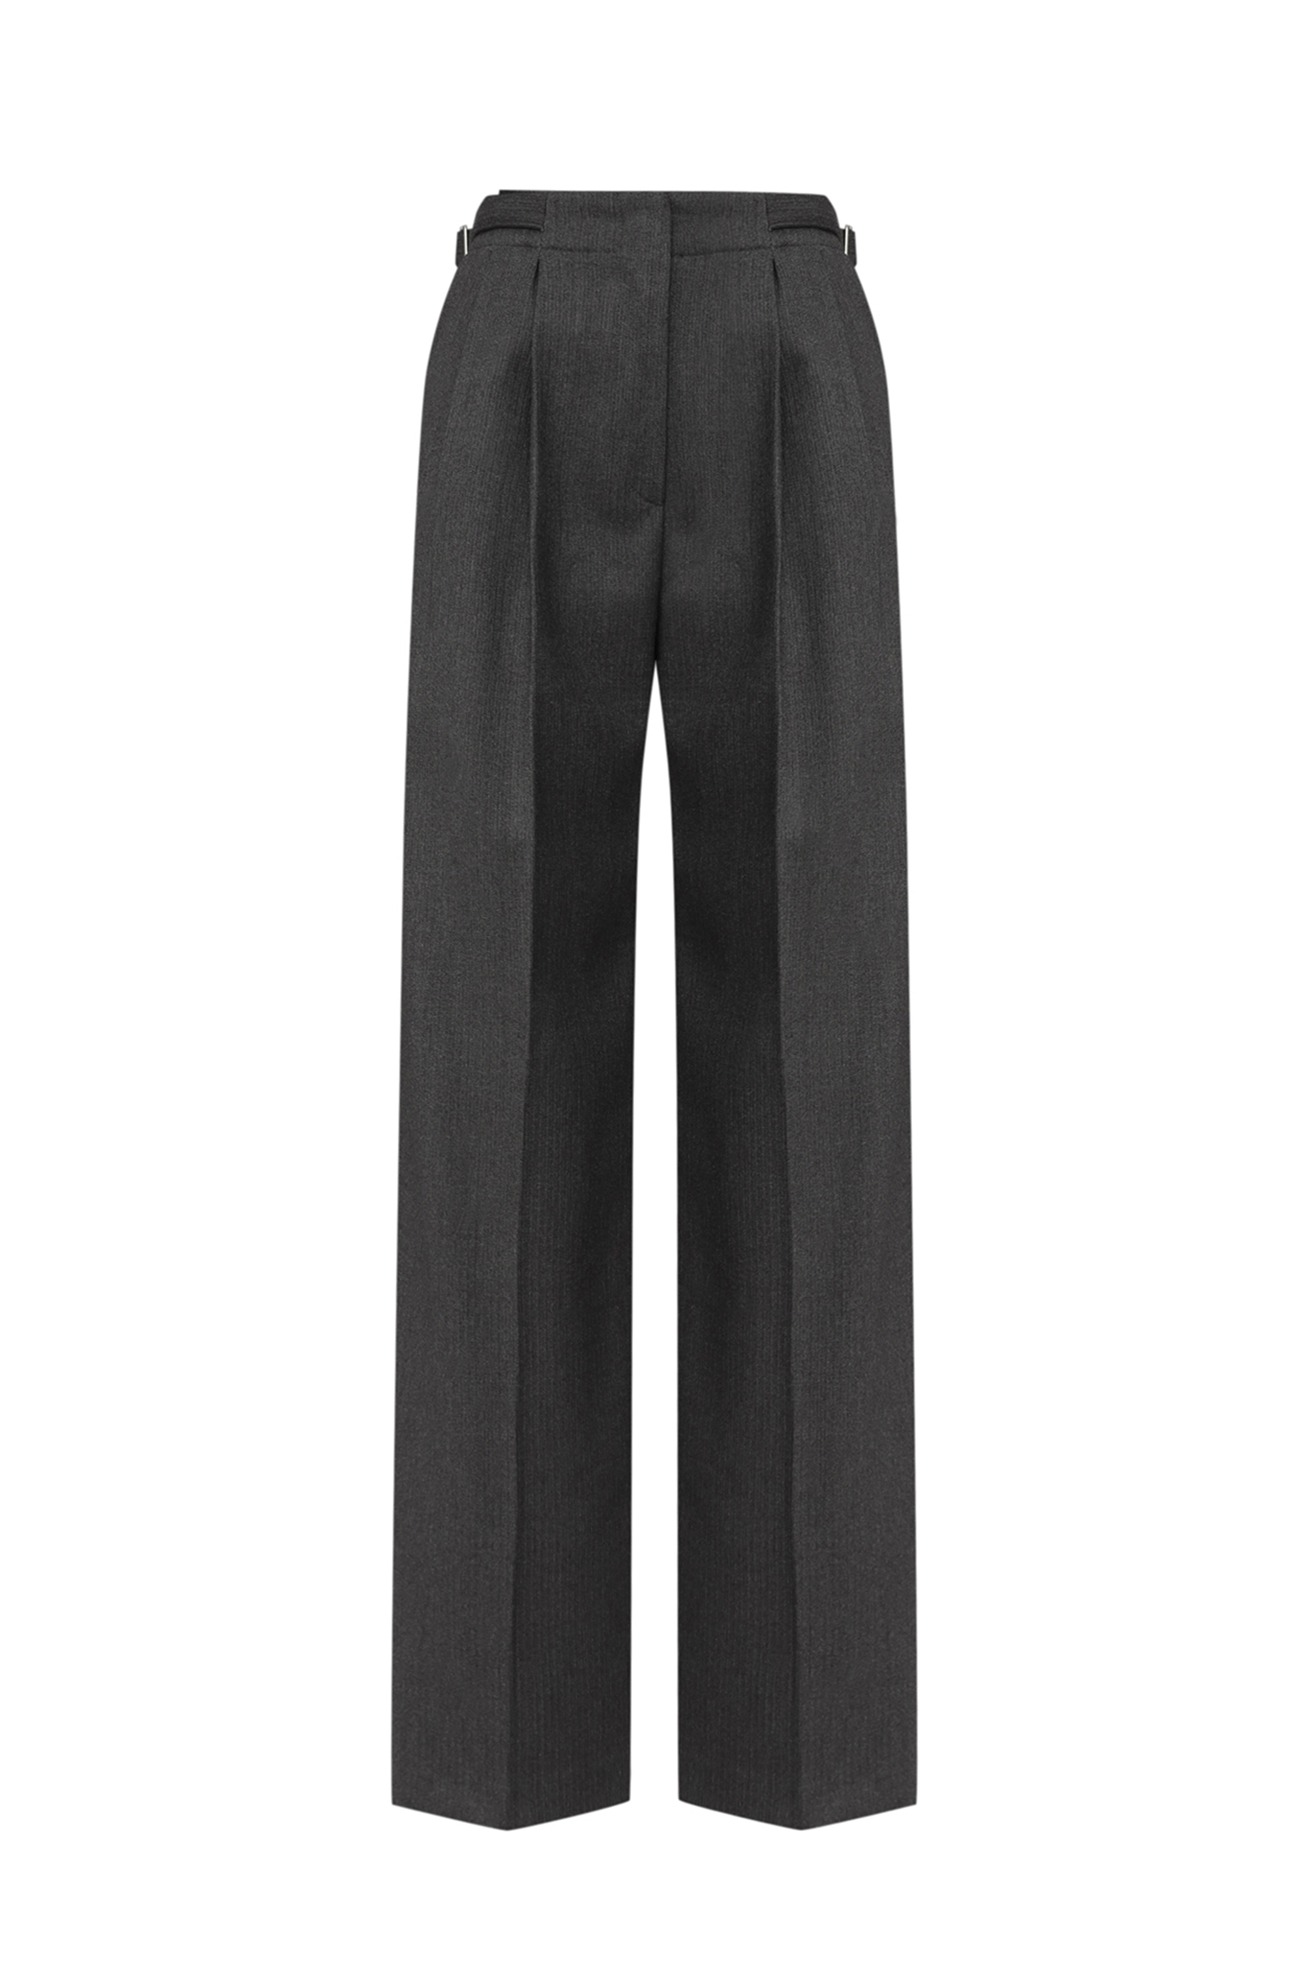 Adjustable Strap Pleat Trousers    2/13 순차발송